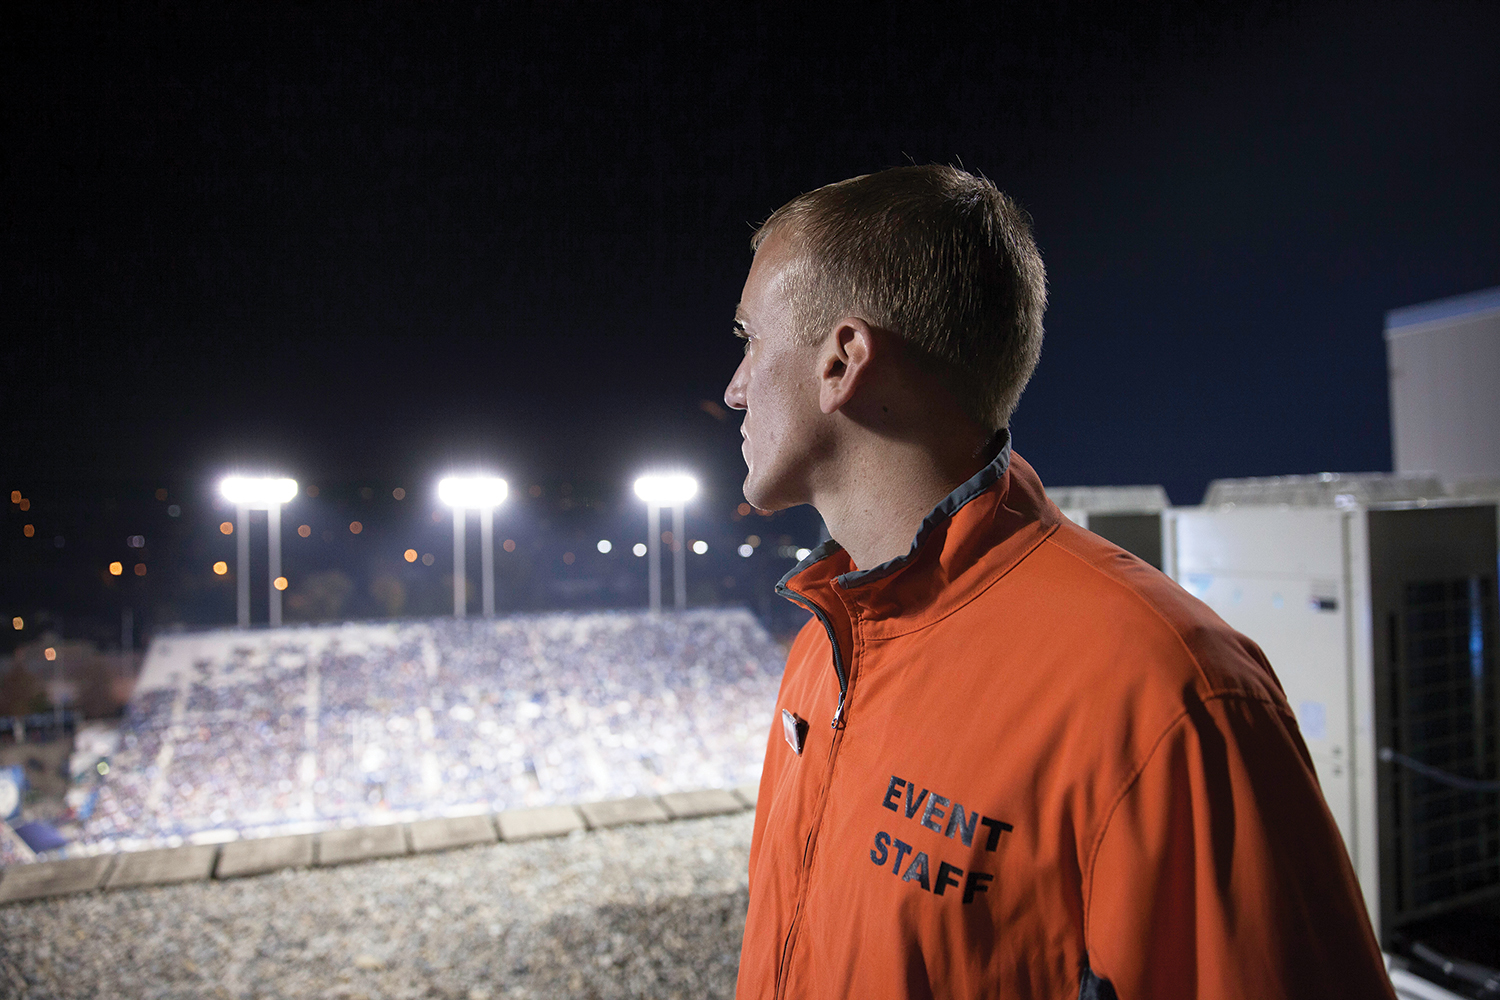 A student security worker watches the field from the stadium roof.